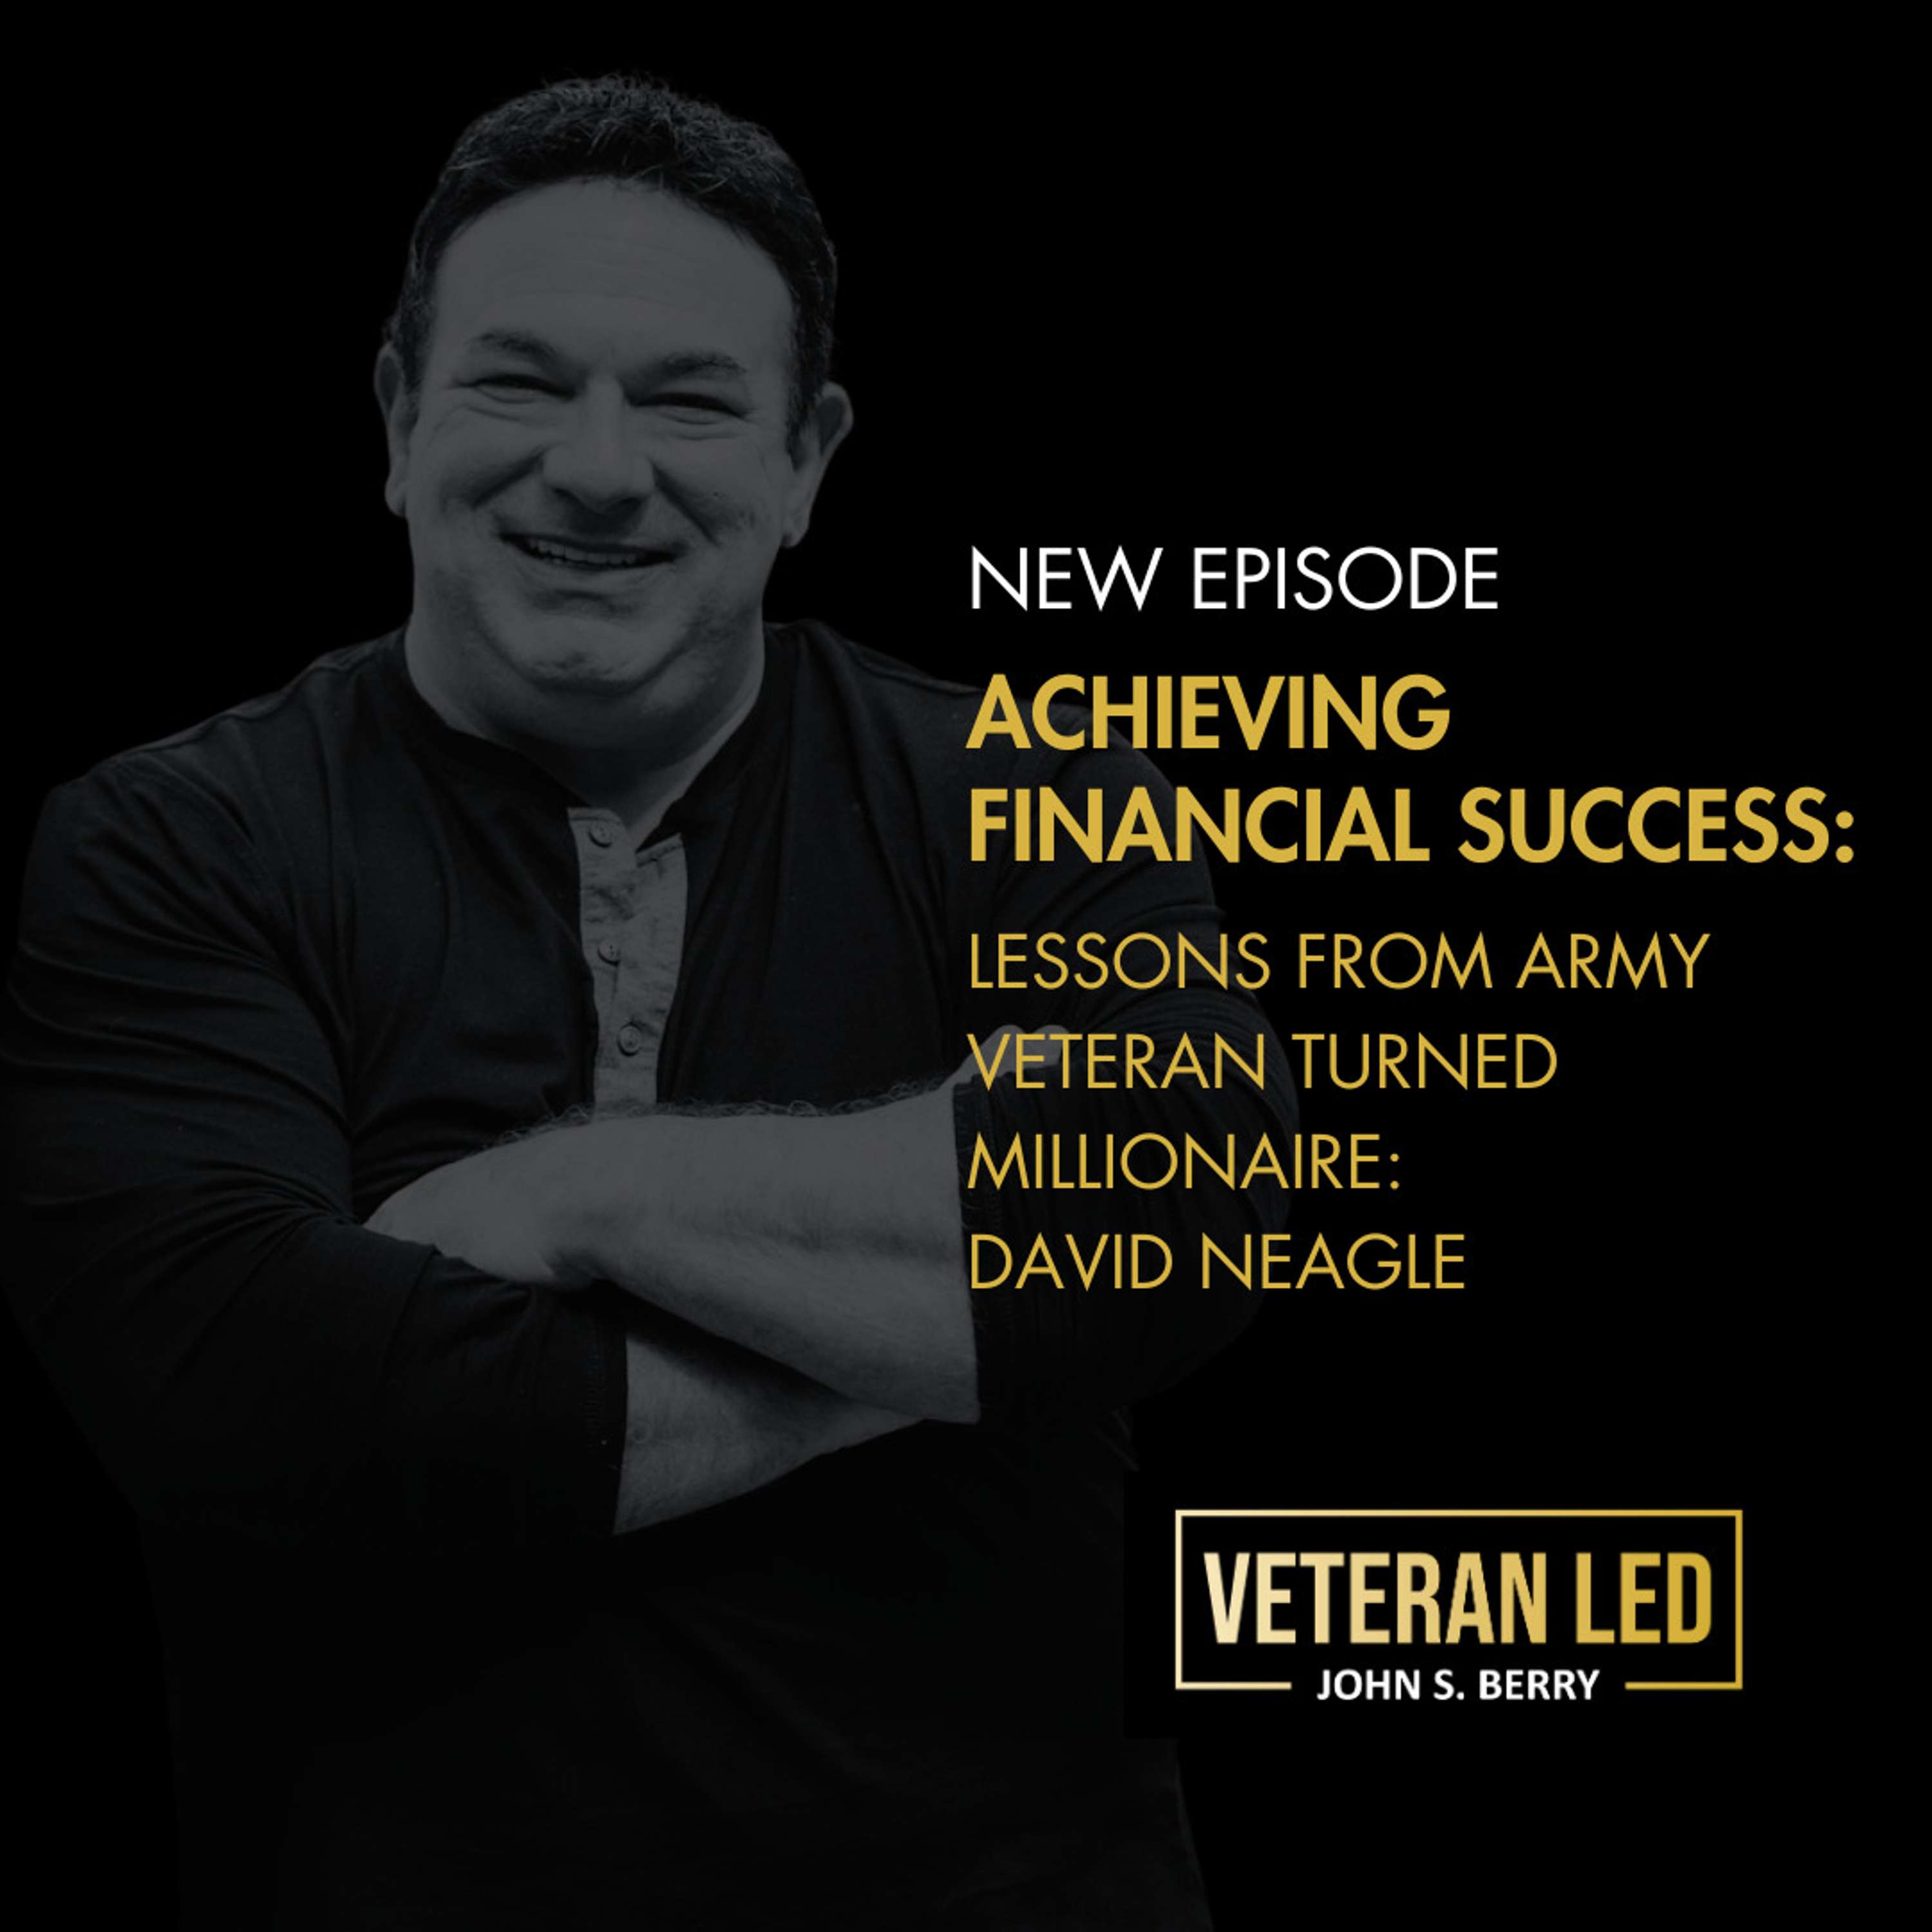 Achieving Financial Success: Lessons from Army Veteran Turned Millionaire, David Neagle